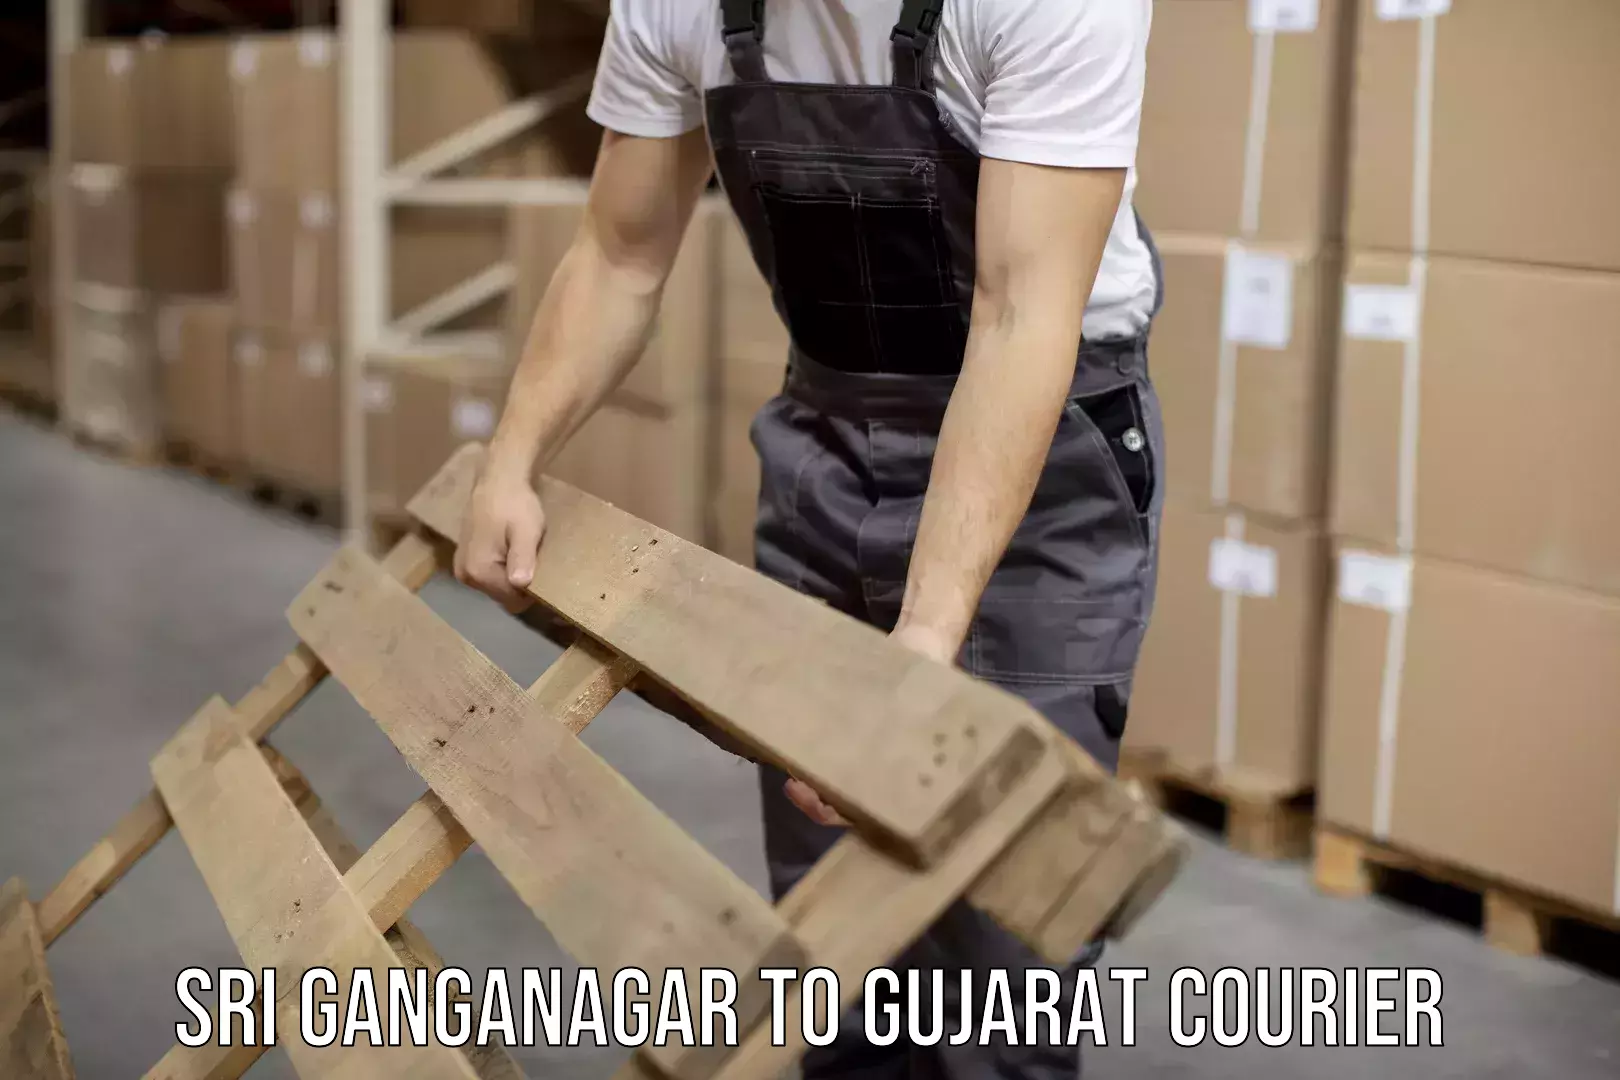 Quality courier services Sri Ganganagar to Talala